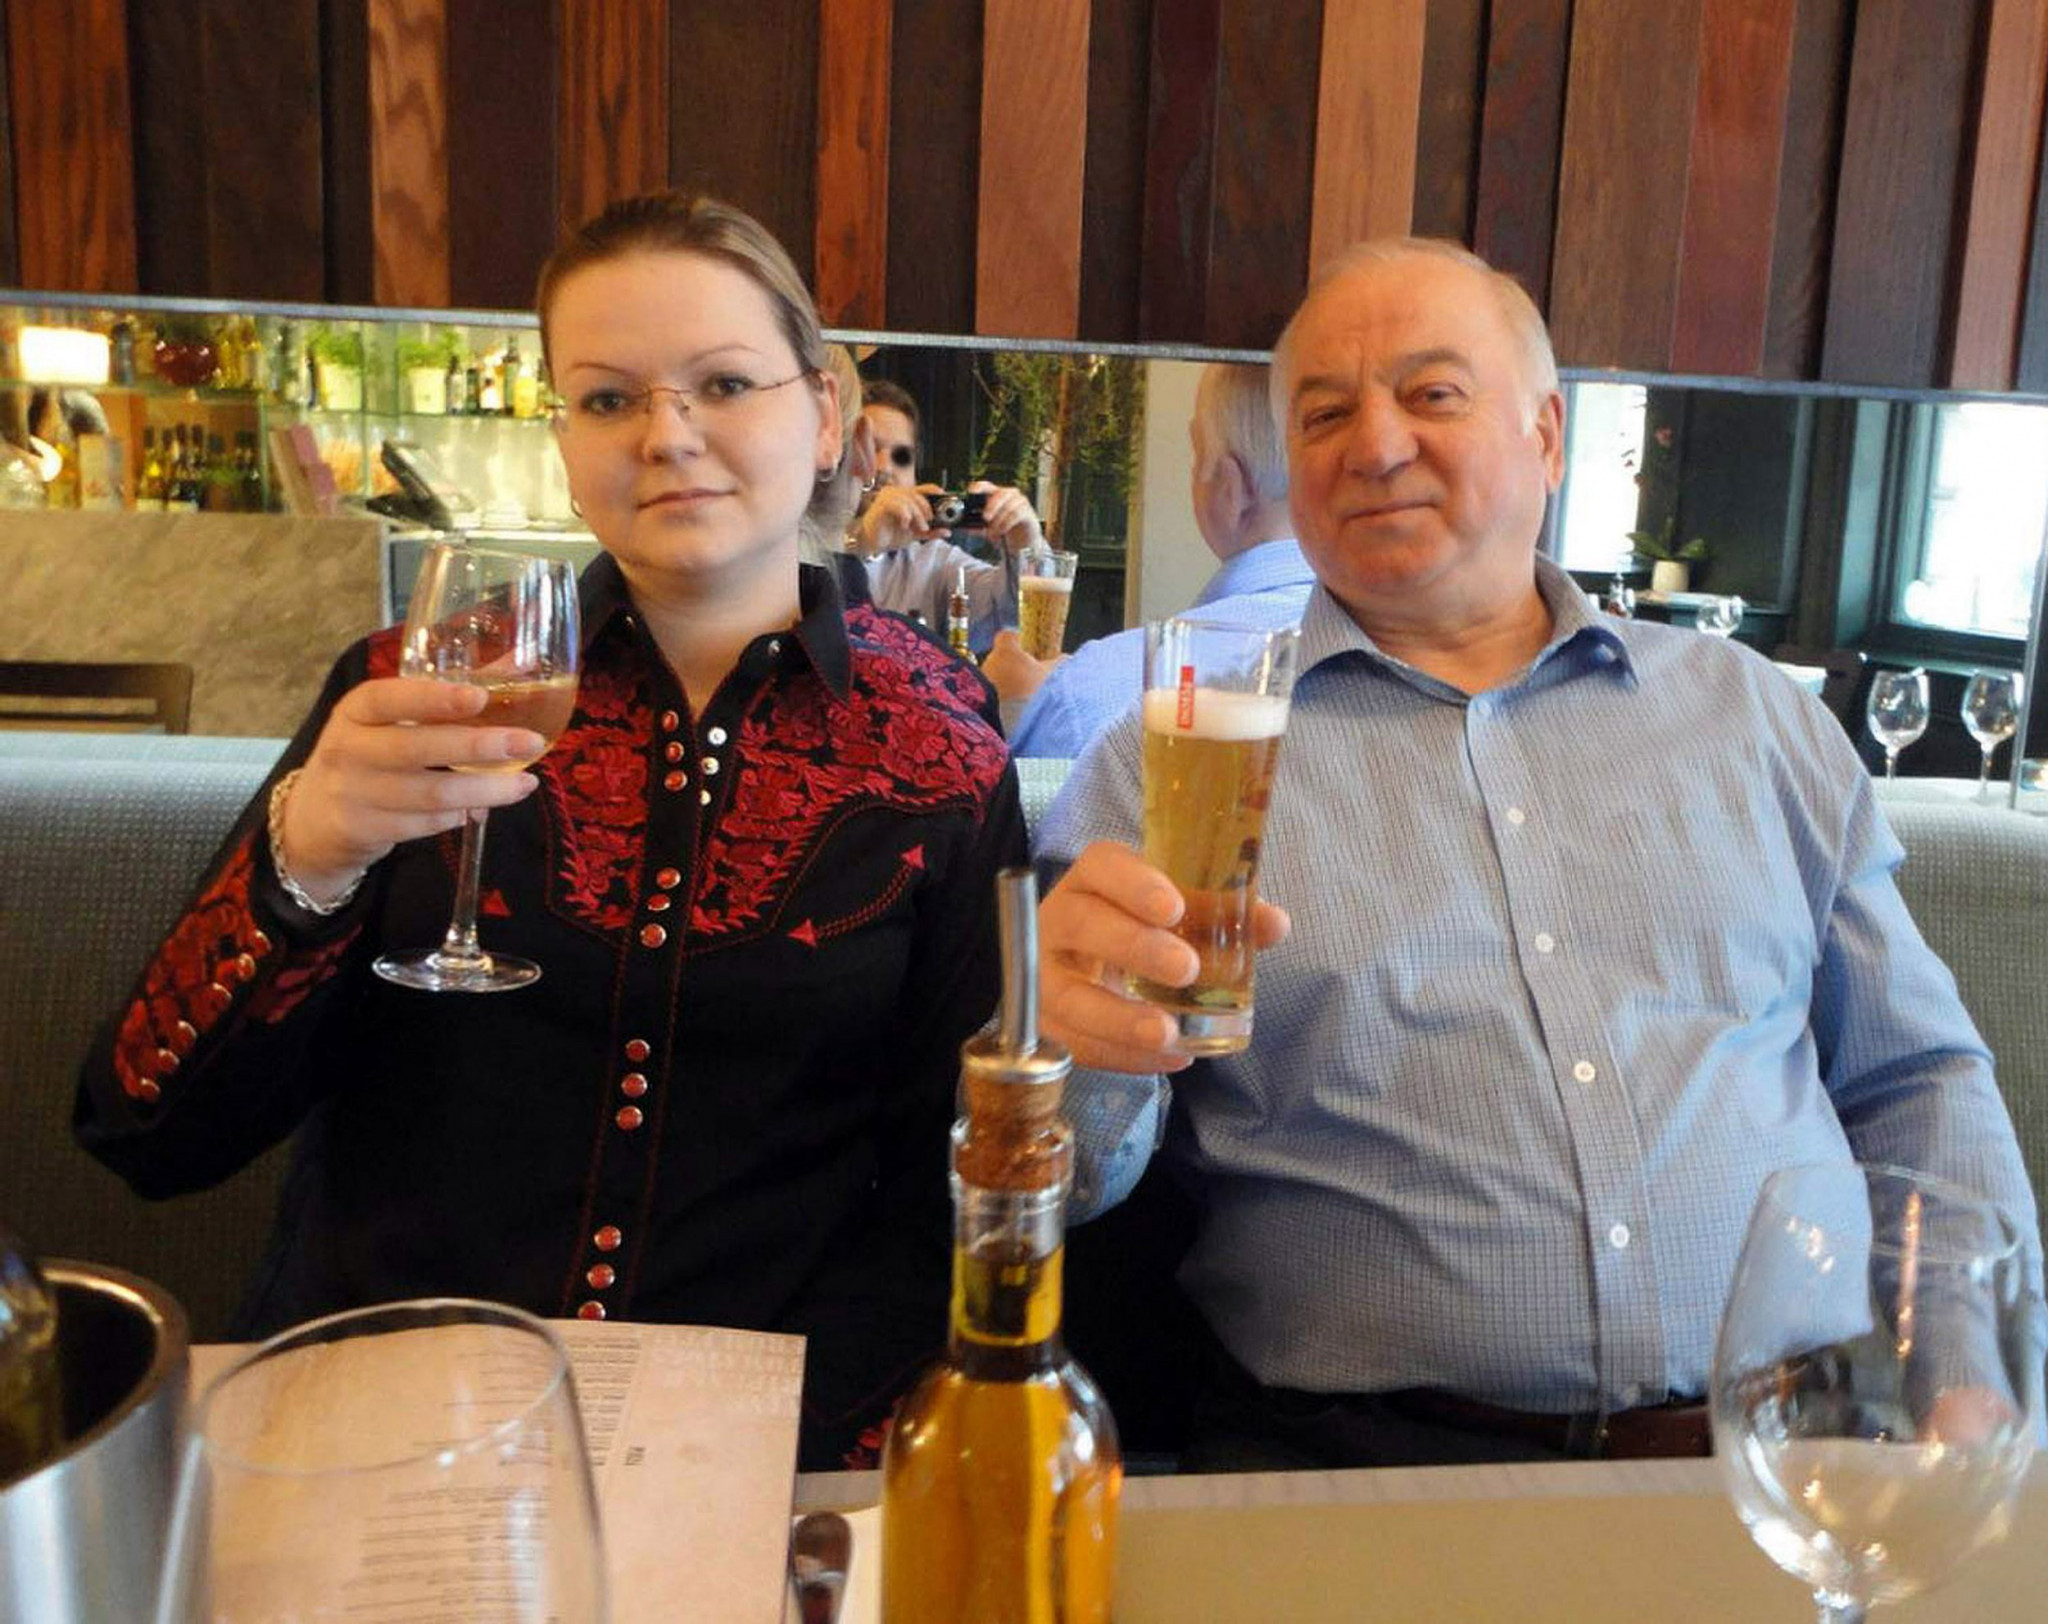 Sergei and Yulia Skripal were poisoned with the Novichok nerve agent by Russian intelligence ©Getty Images